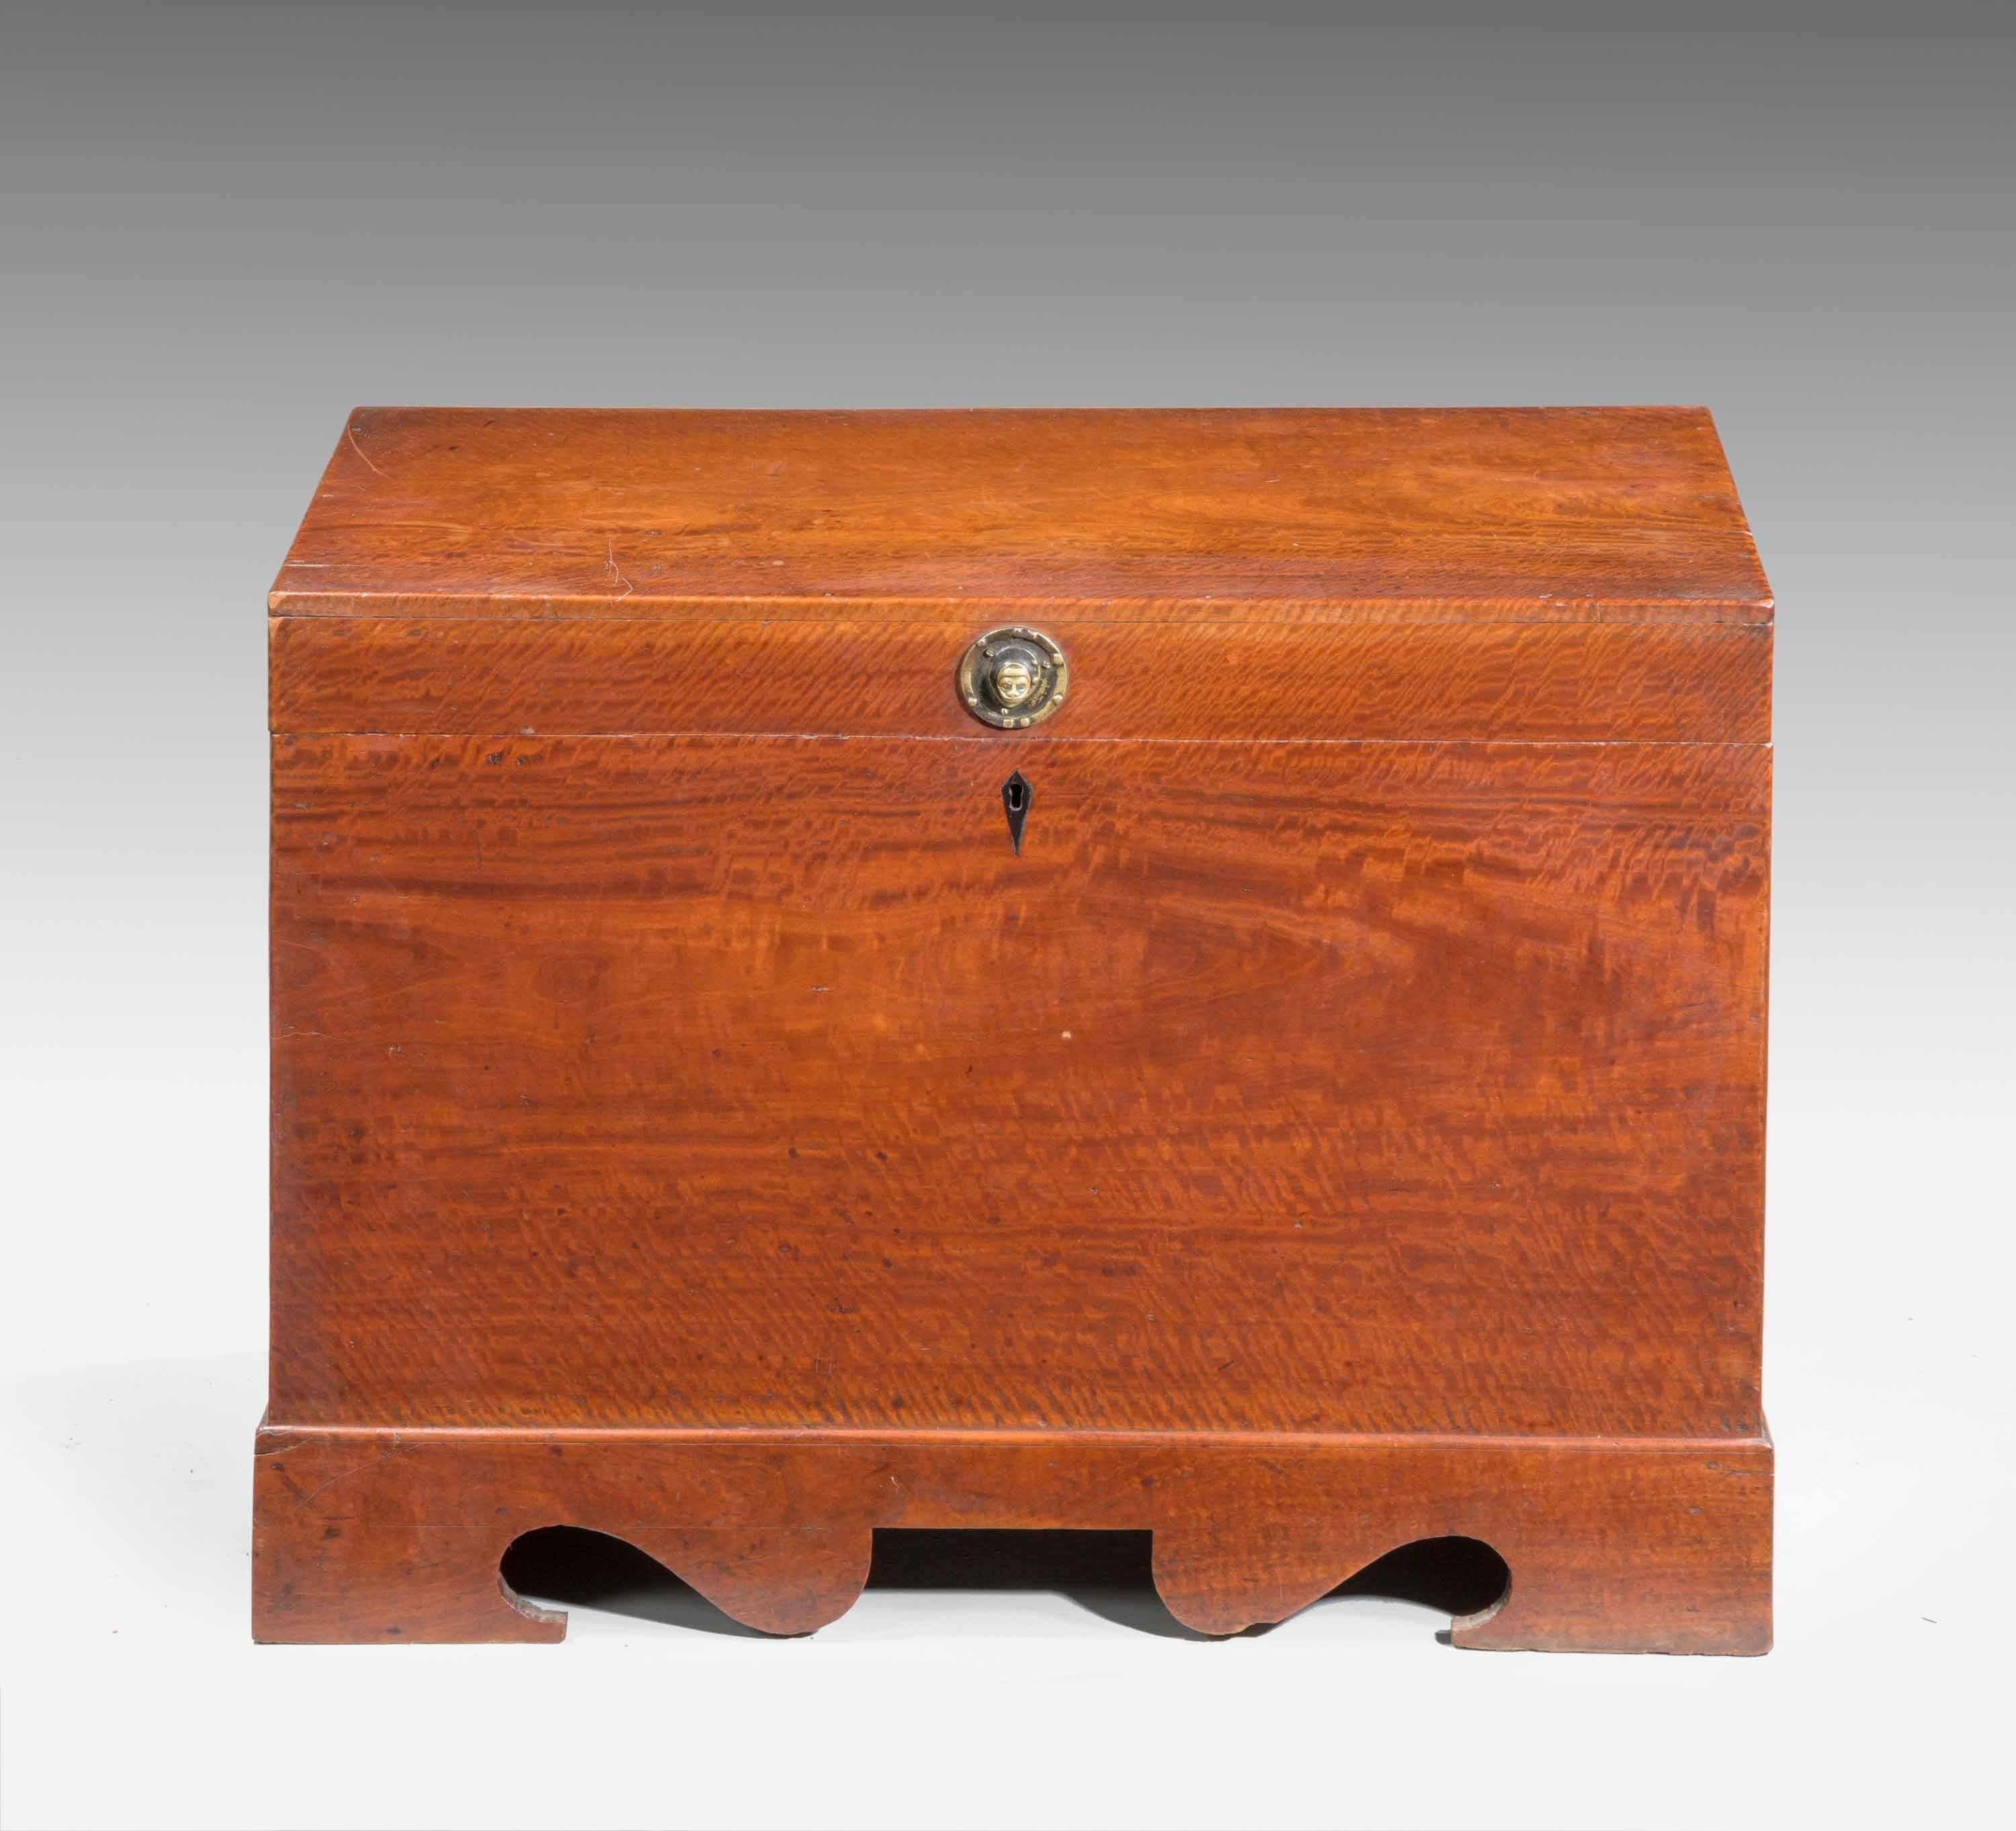 Mid 19th Century teak Rectangular Lidded Box with beautifully figured timbers, the interior retaining its golden colour.
